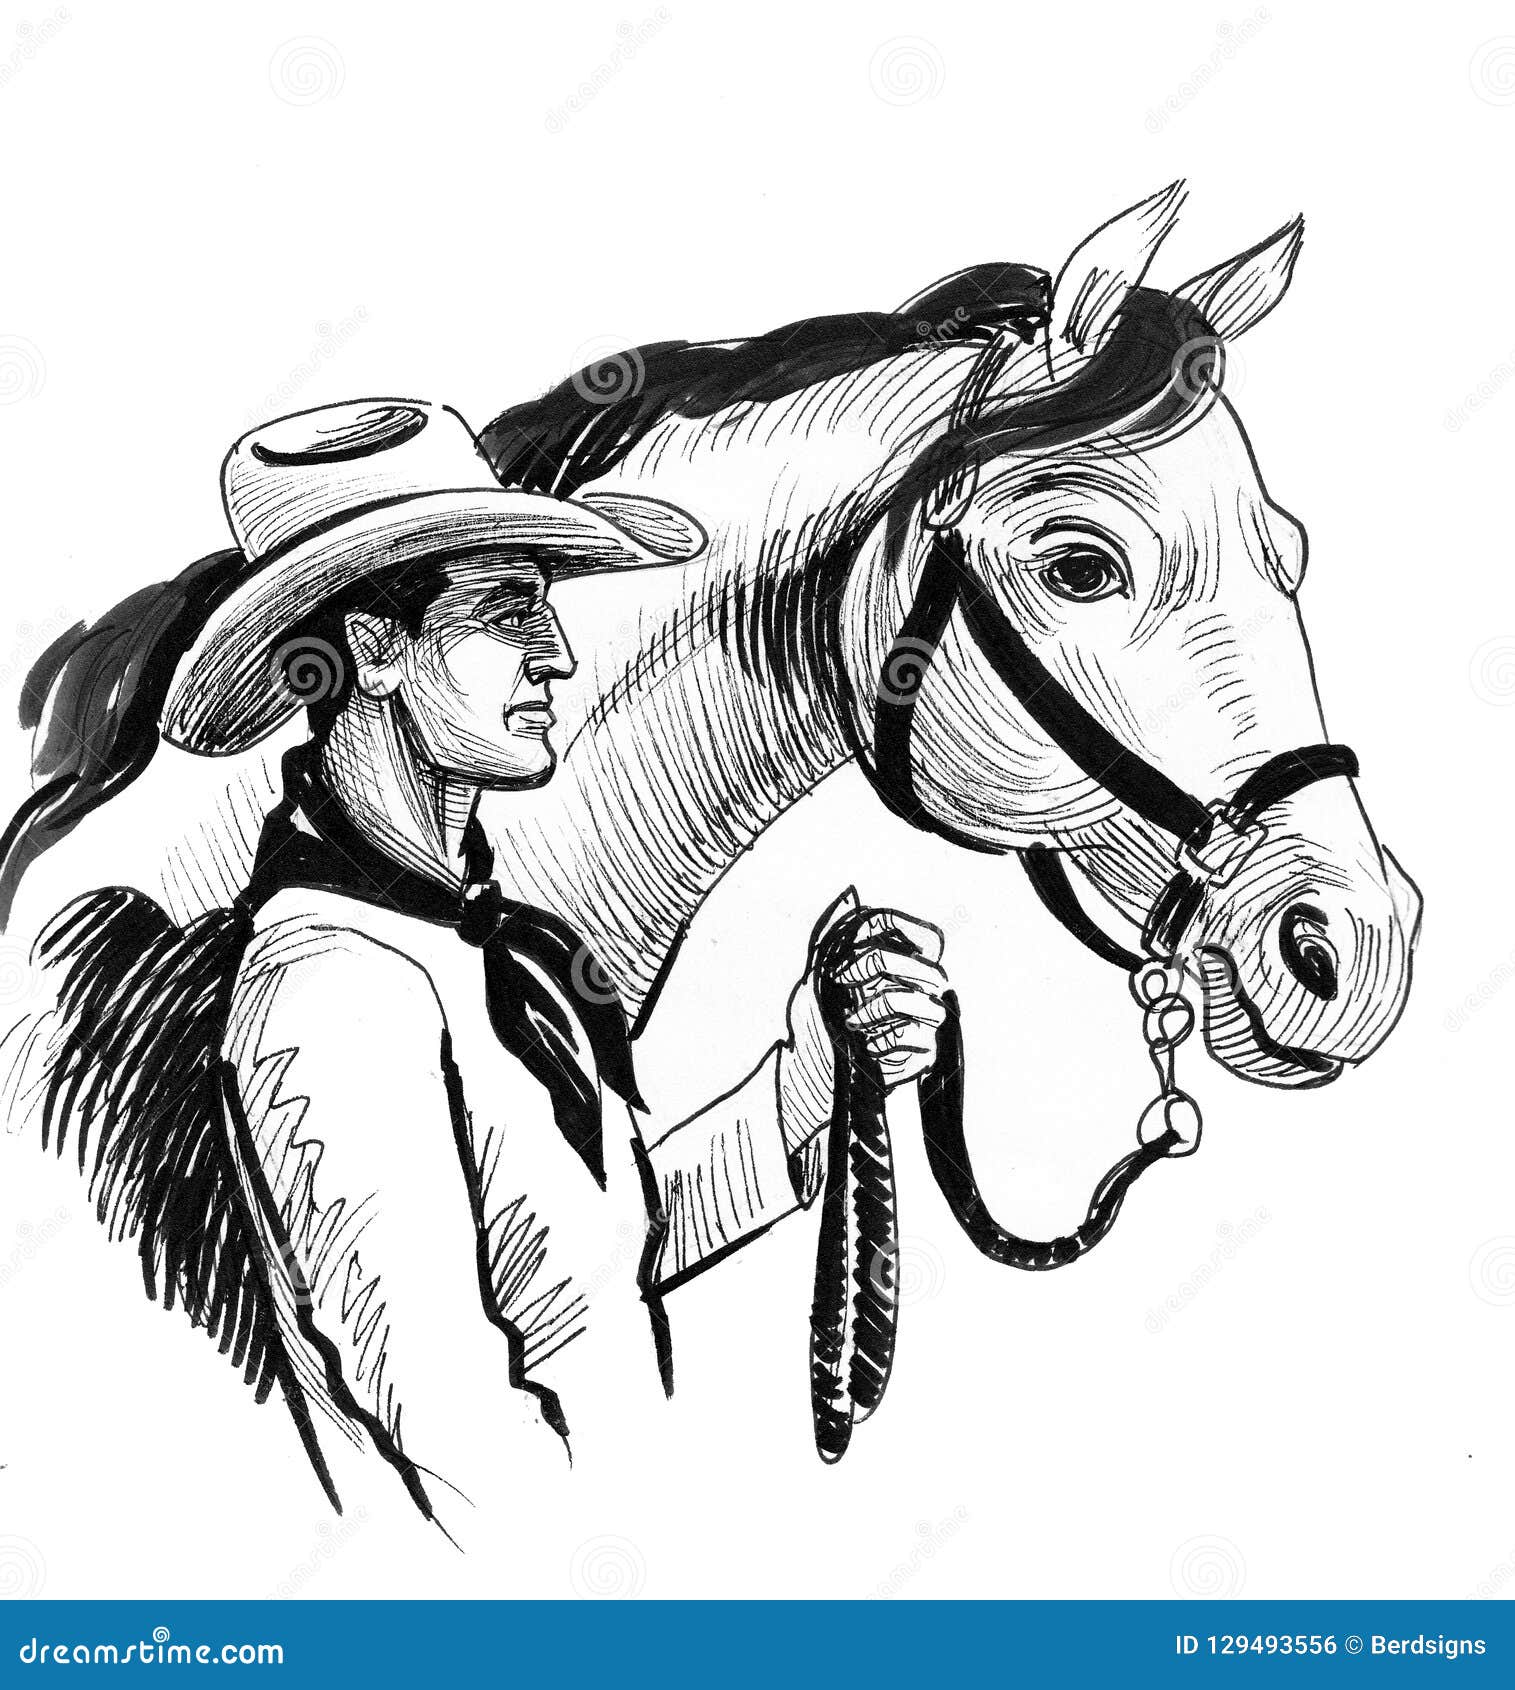 Cowboy Drawing Tutorial - How to draw Cowboy step by step